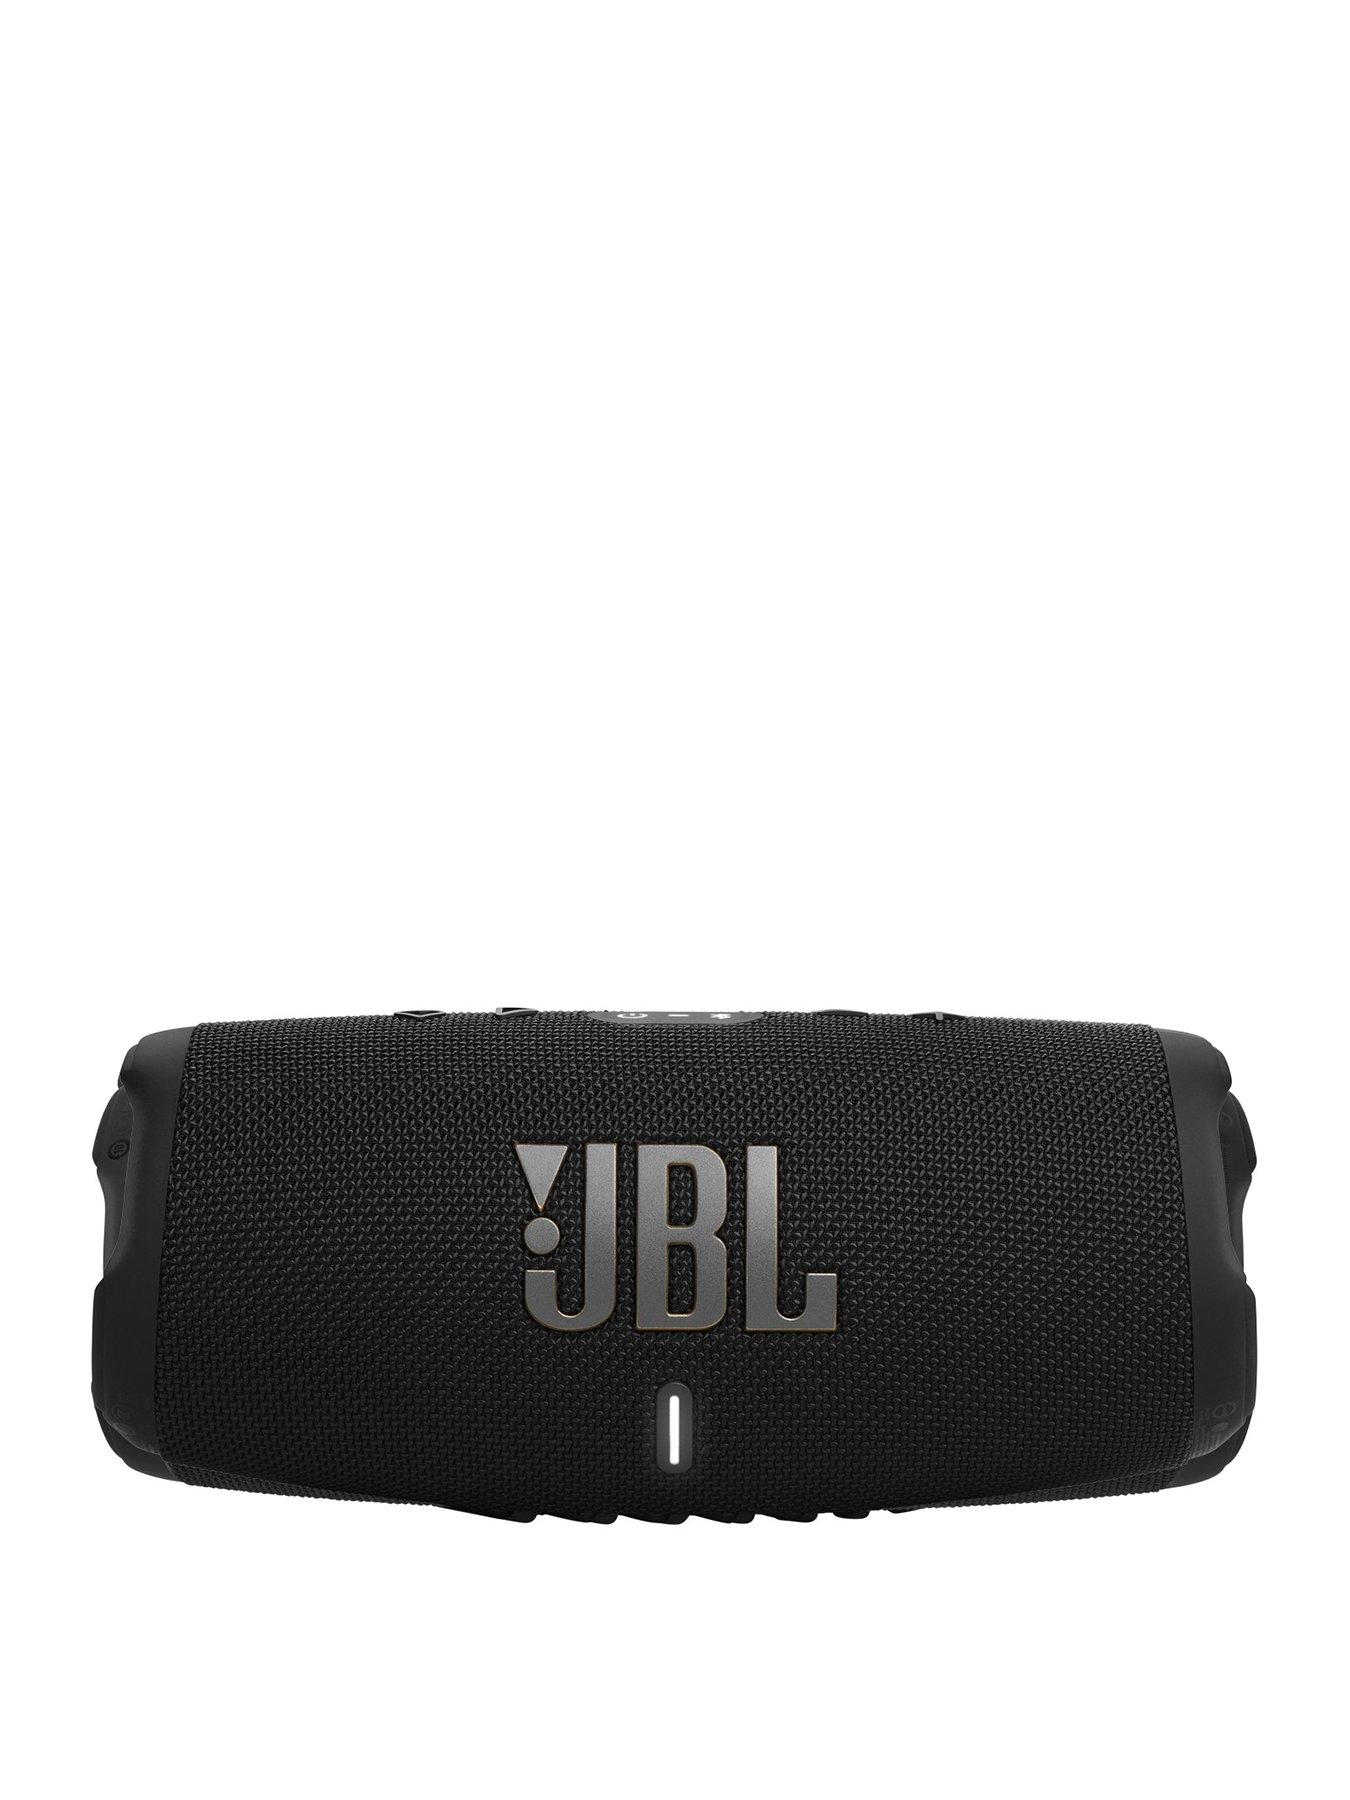 JBL Charge 5 review: a powerful and rugged portable Bluetooth speaker